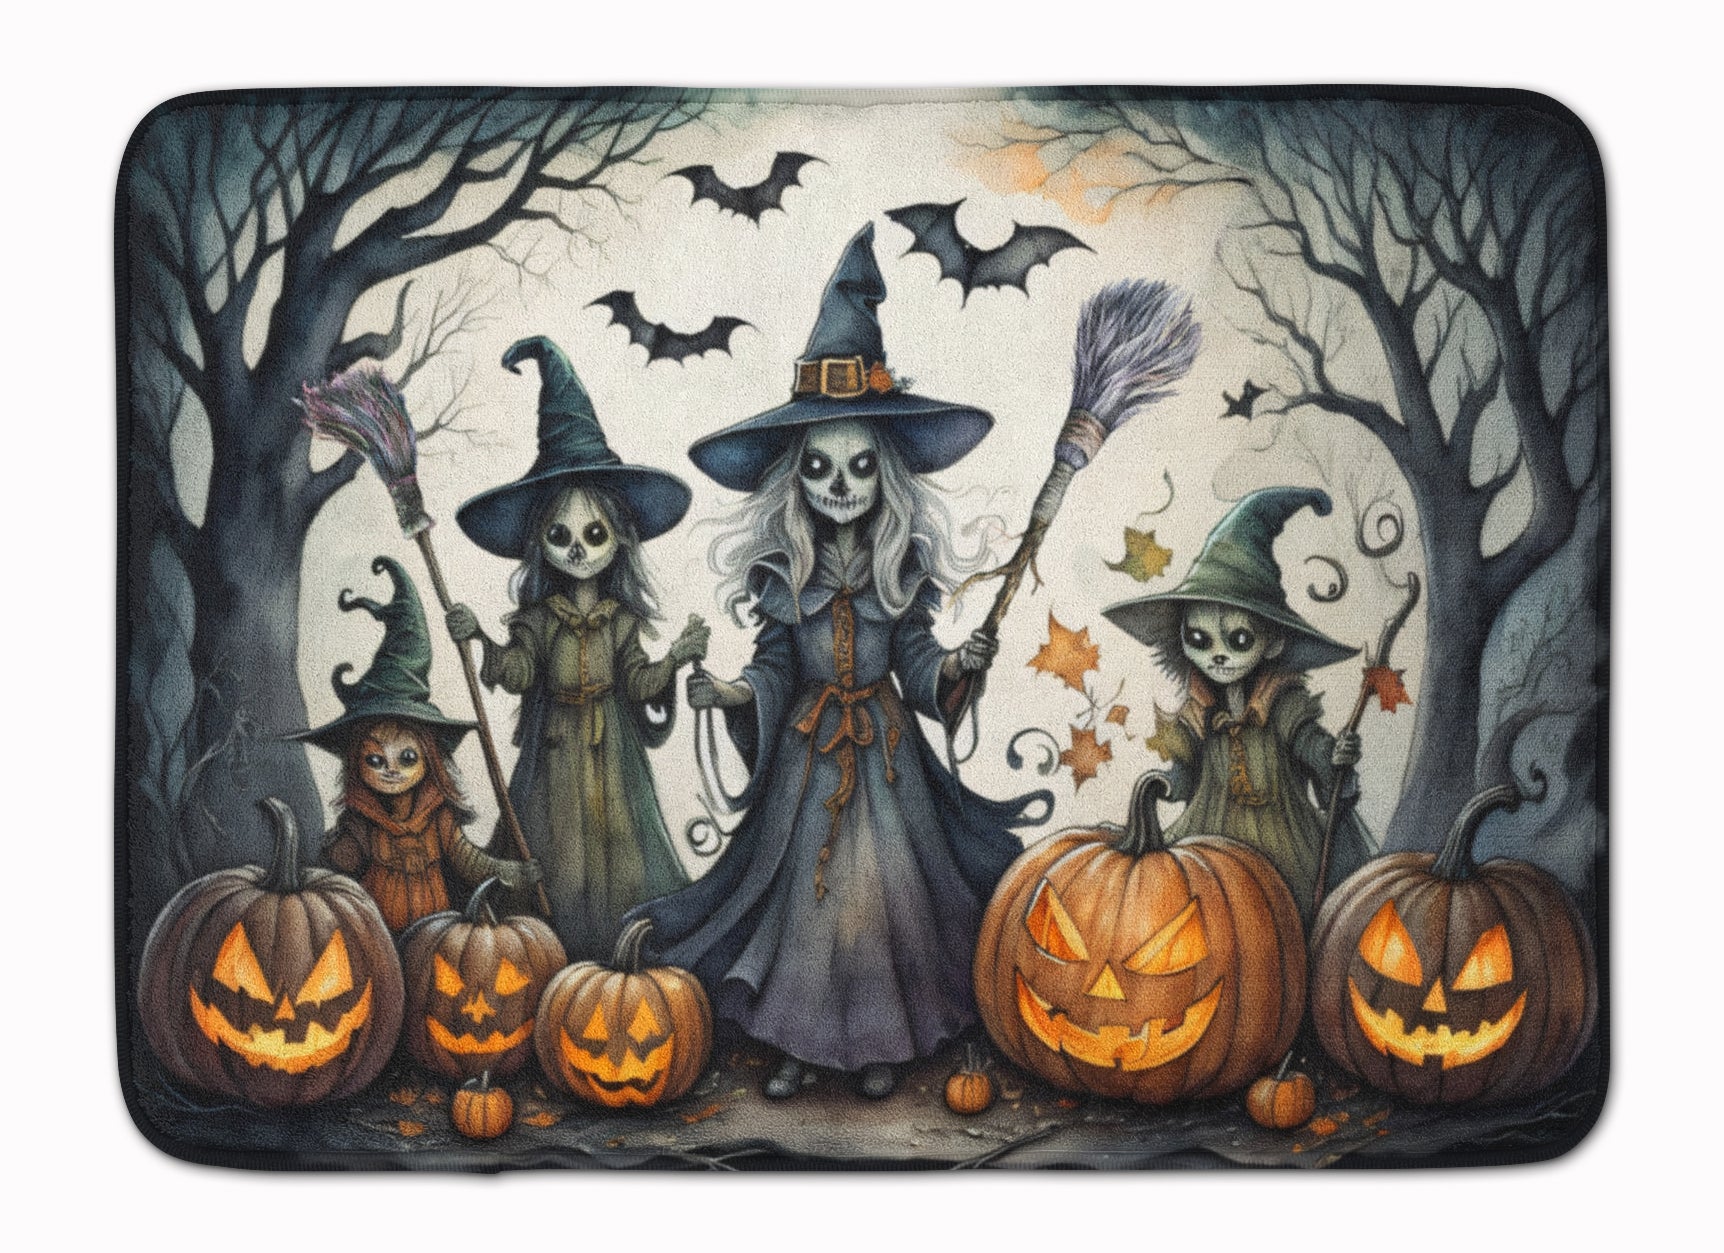 Buy this Witches Spooky Halloween Memory Foam Kitchen Mat